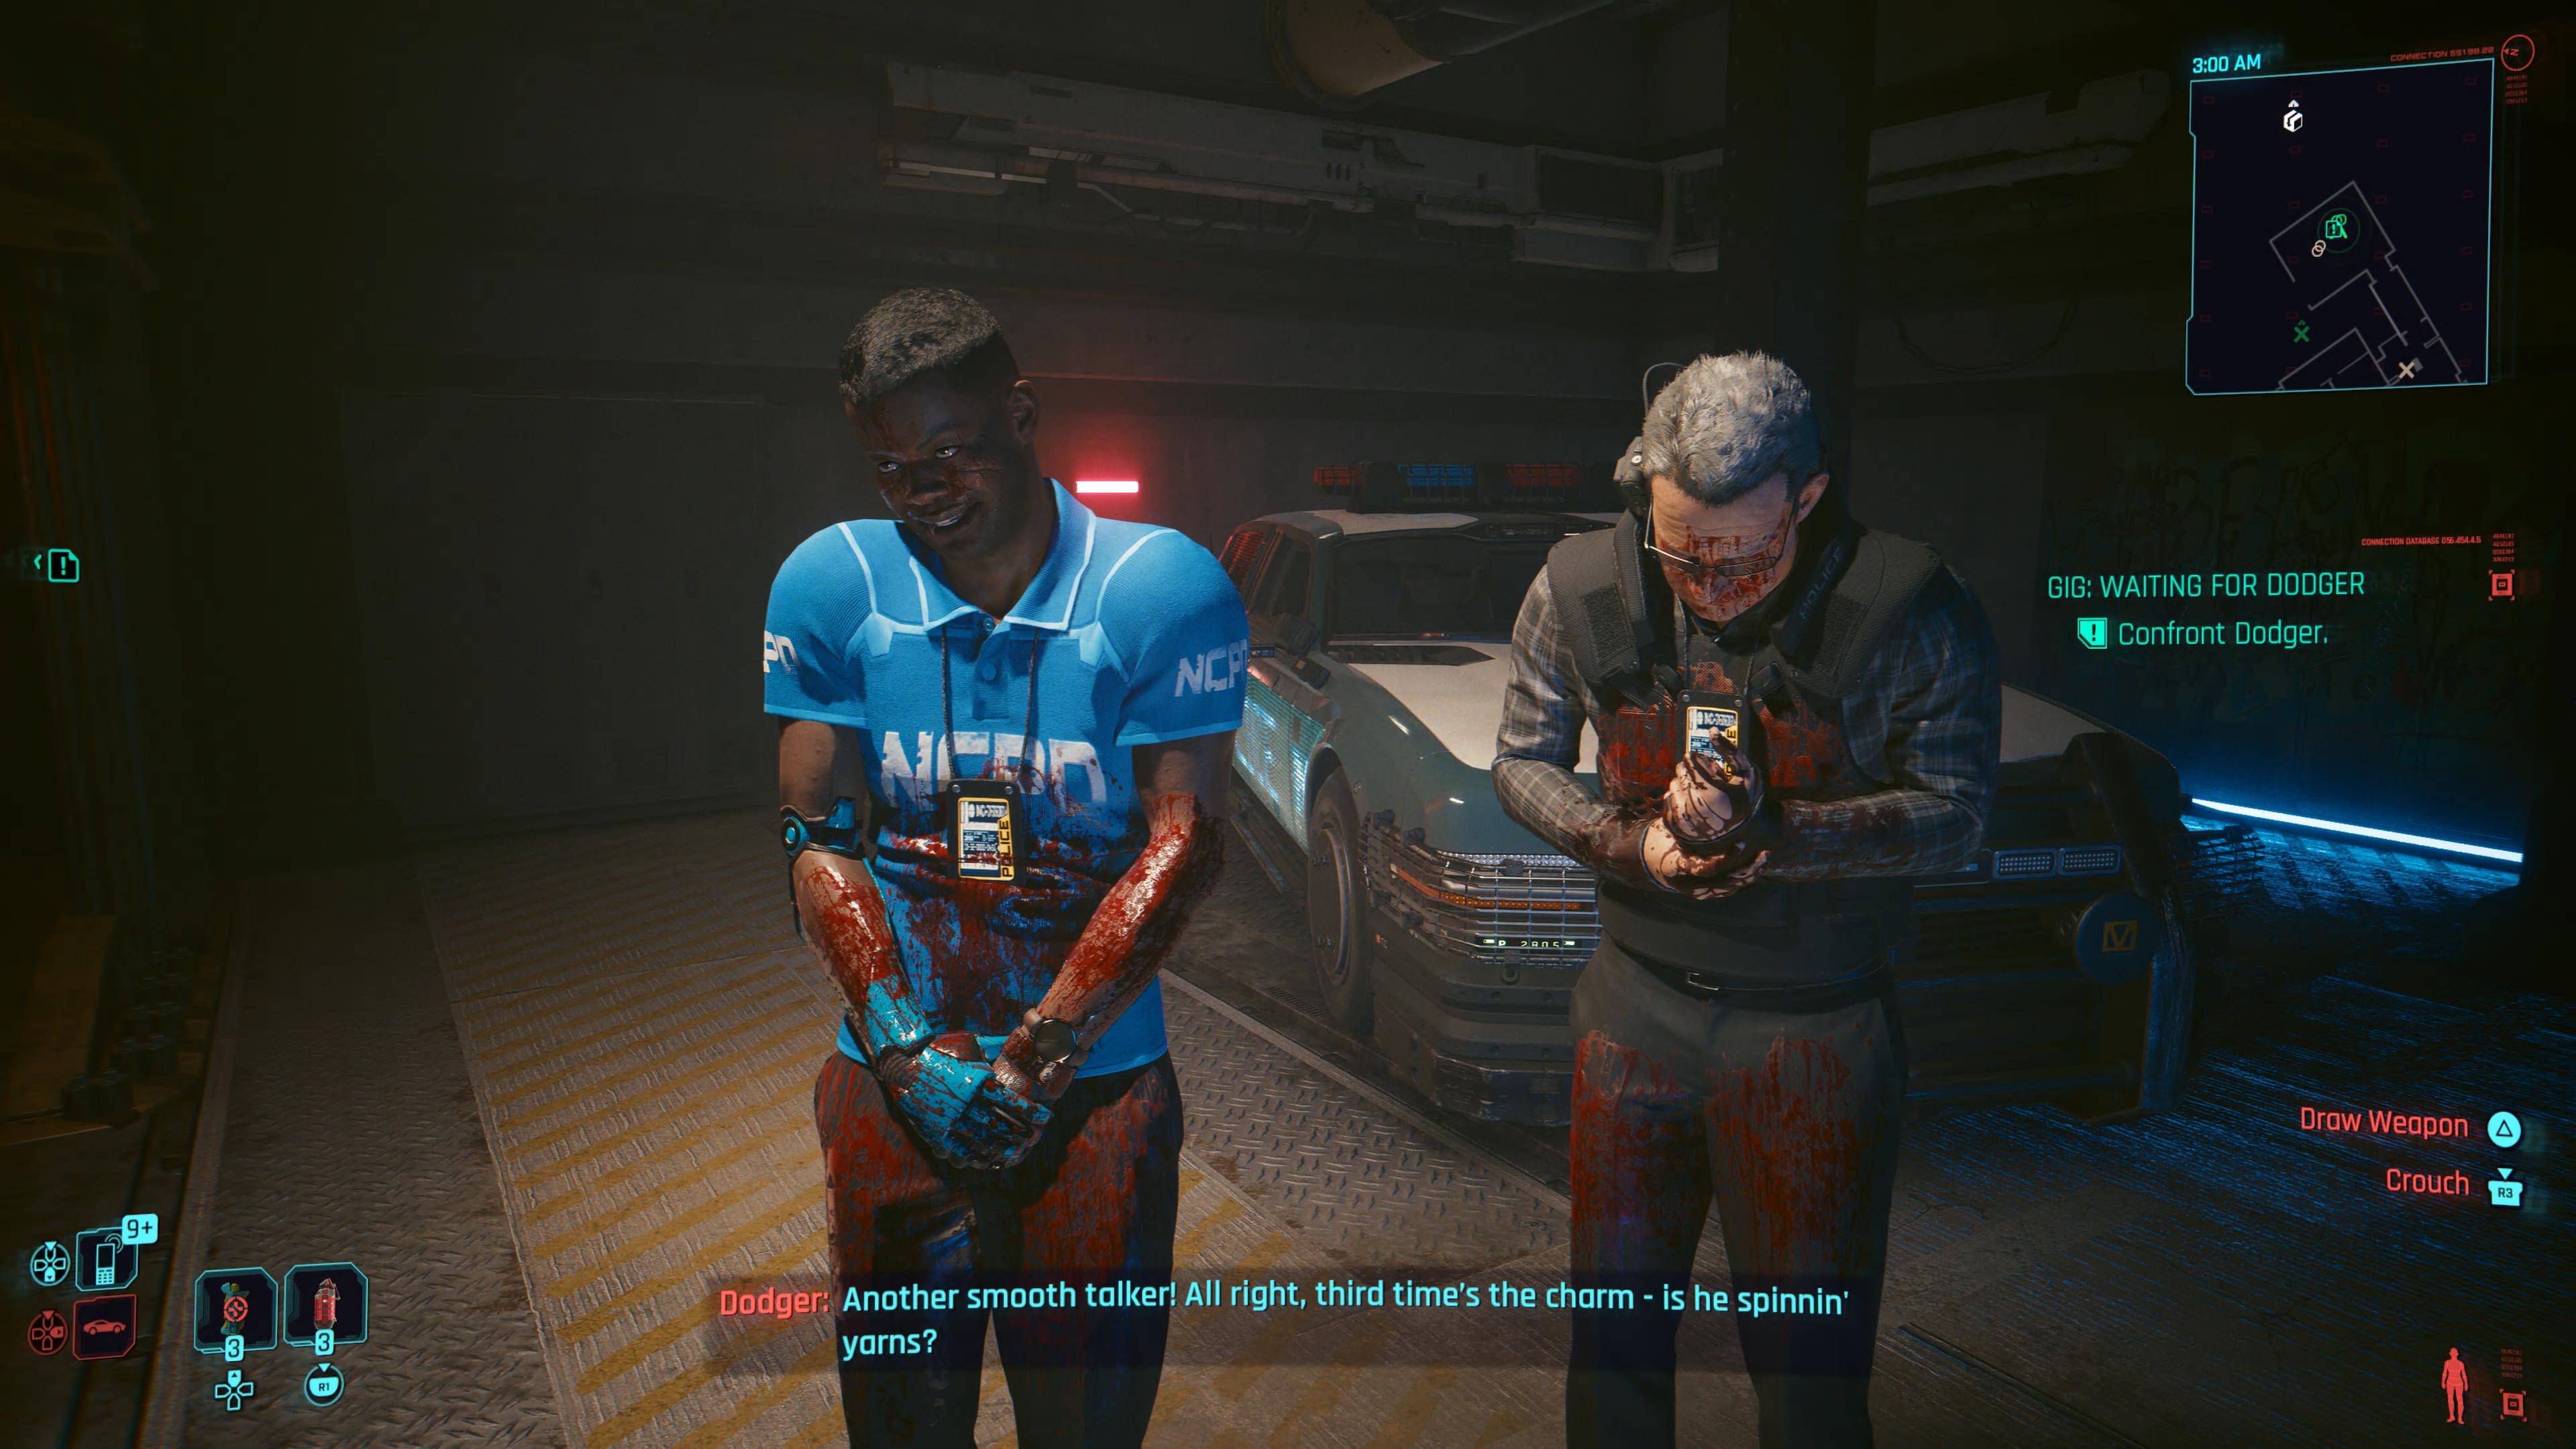 An in game screenshot of the characters Bill and Charlie from the game Cyberpunk 2077.